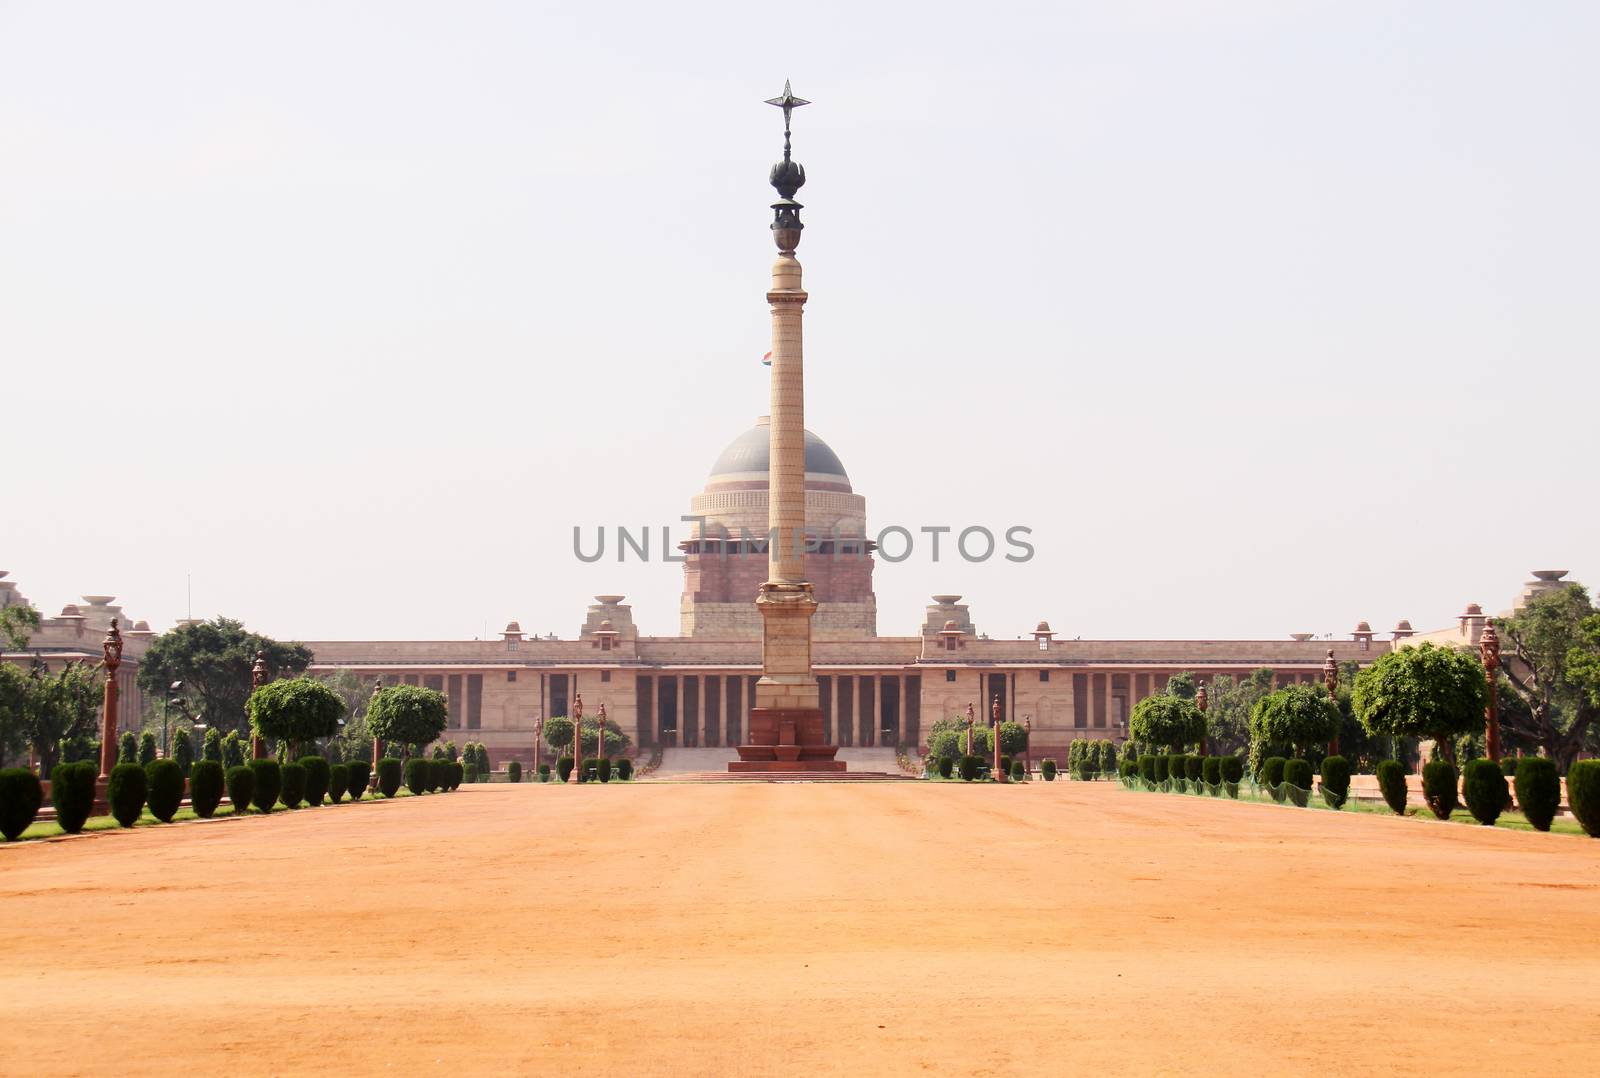 Rashtrapati Bhavan - Indian presidental palace (former Viceroy's House when Indian was under British rule) in New Delhi, India